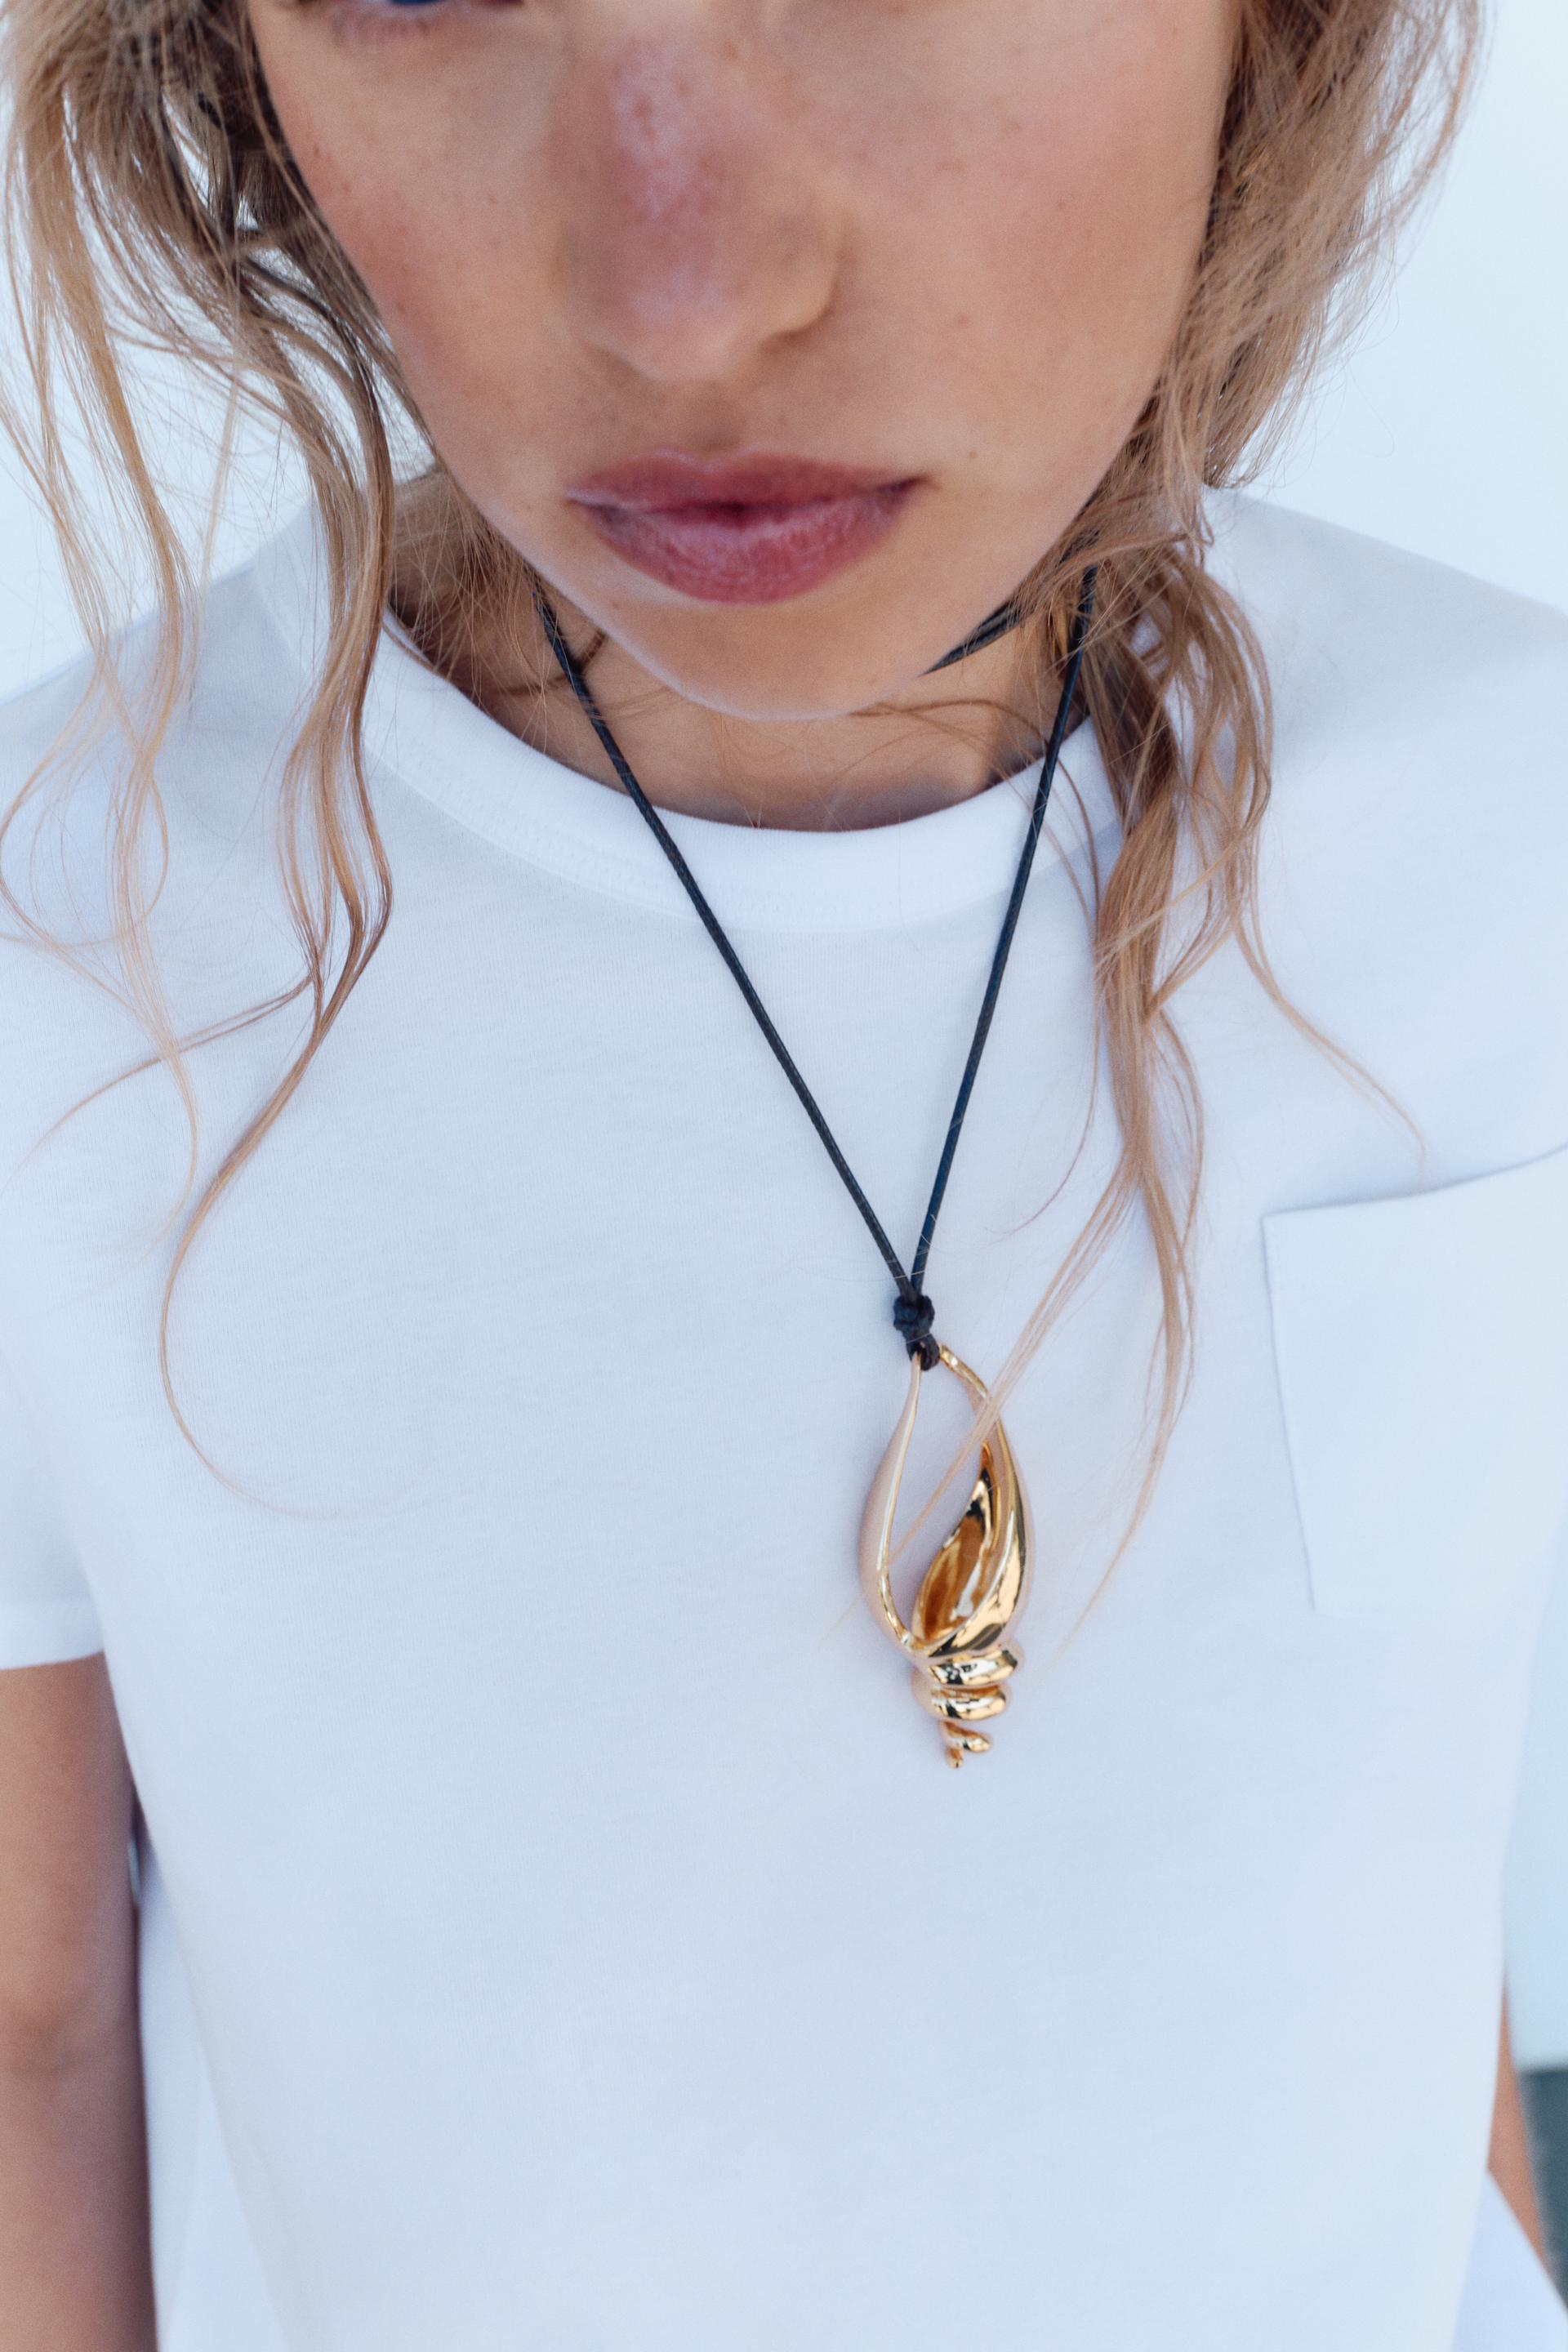 rope pendant necklaces are trending, these are the top 7 to buy now